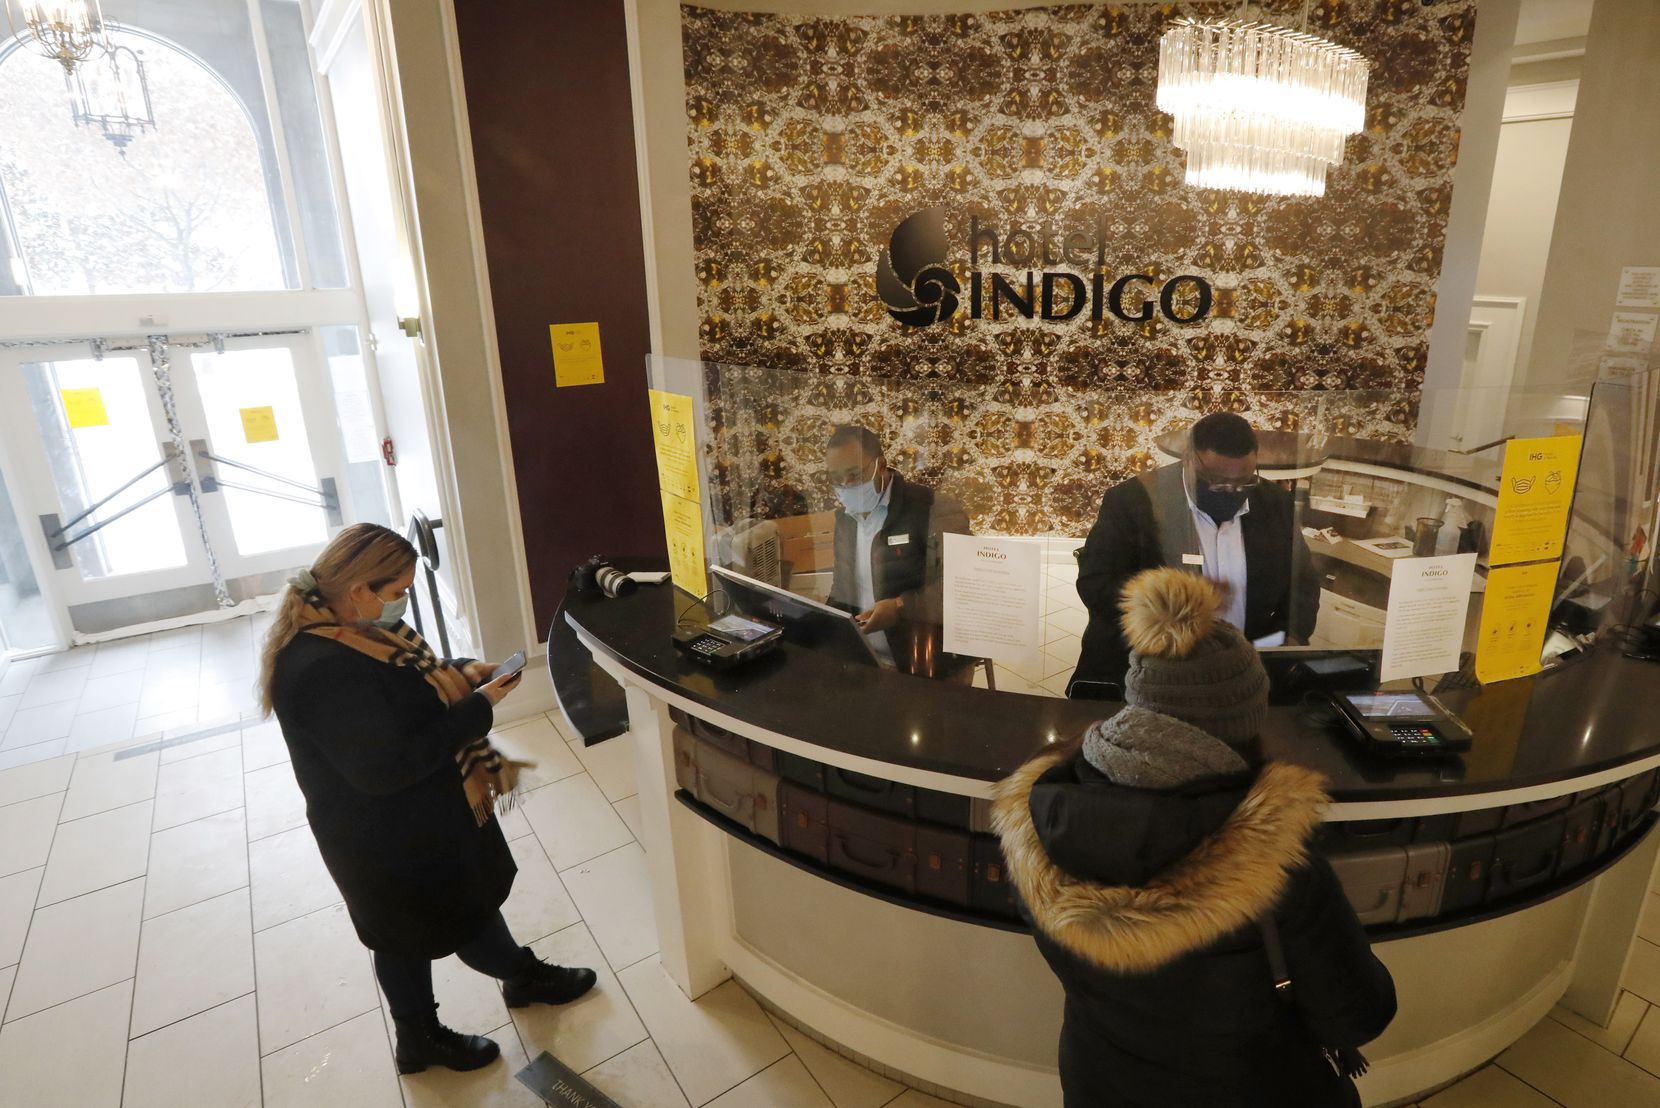 Veronica Quiroz (left) of Seagoville checked her phone as she was being checked in by general manager Marcus Hennigan (center) as Brian Smith checks in another guest at the Hotel Indigo on Main Street in downtown Dallas on Feb. 17. 